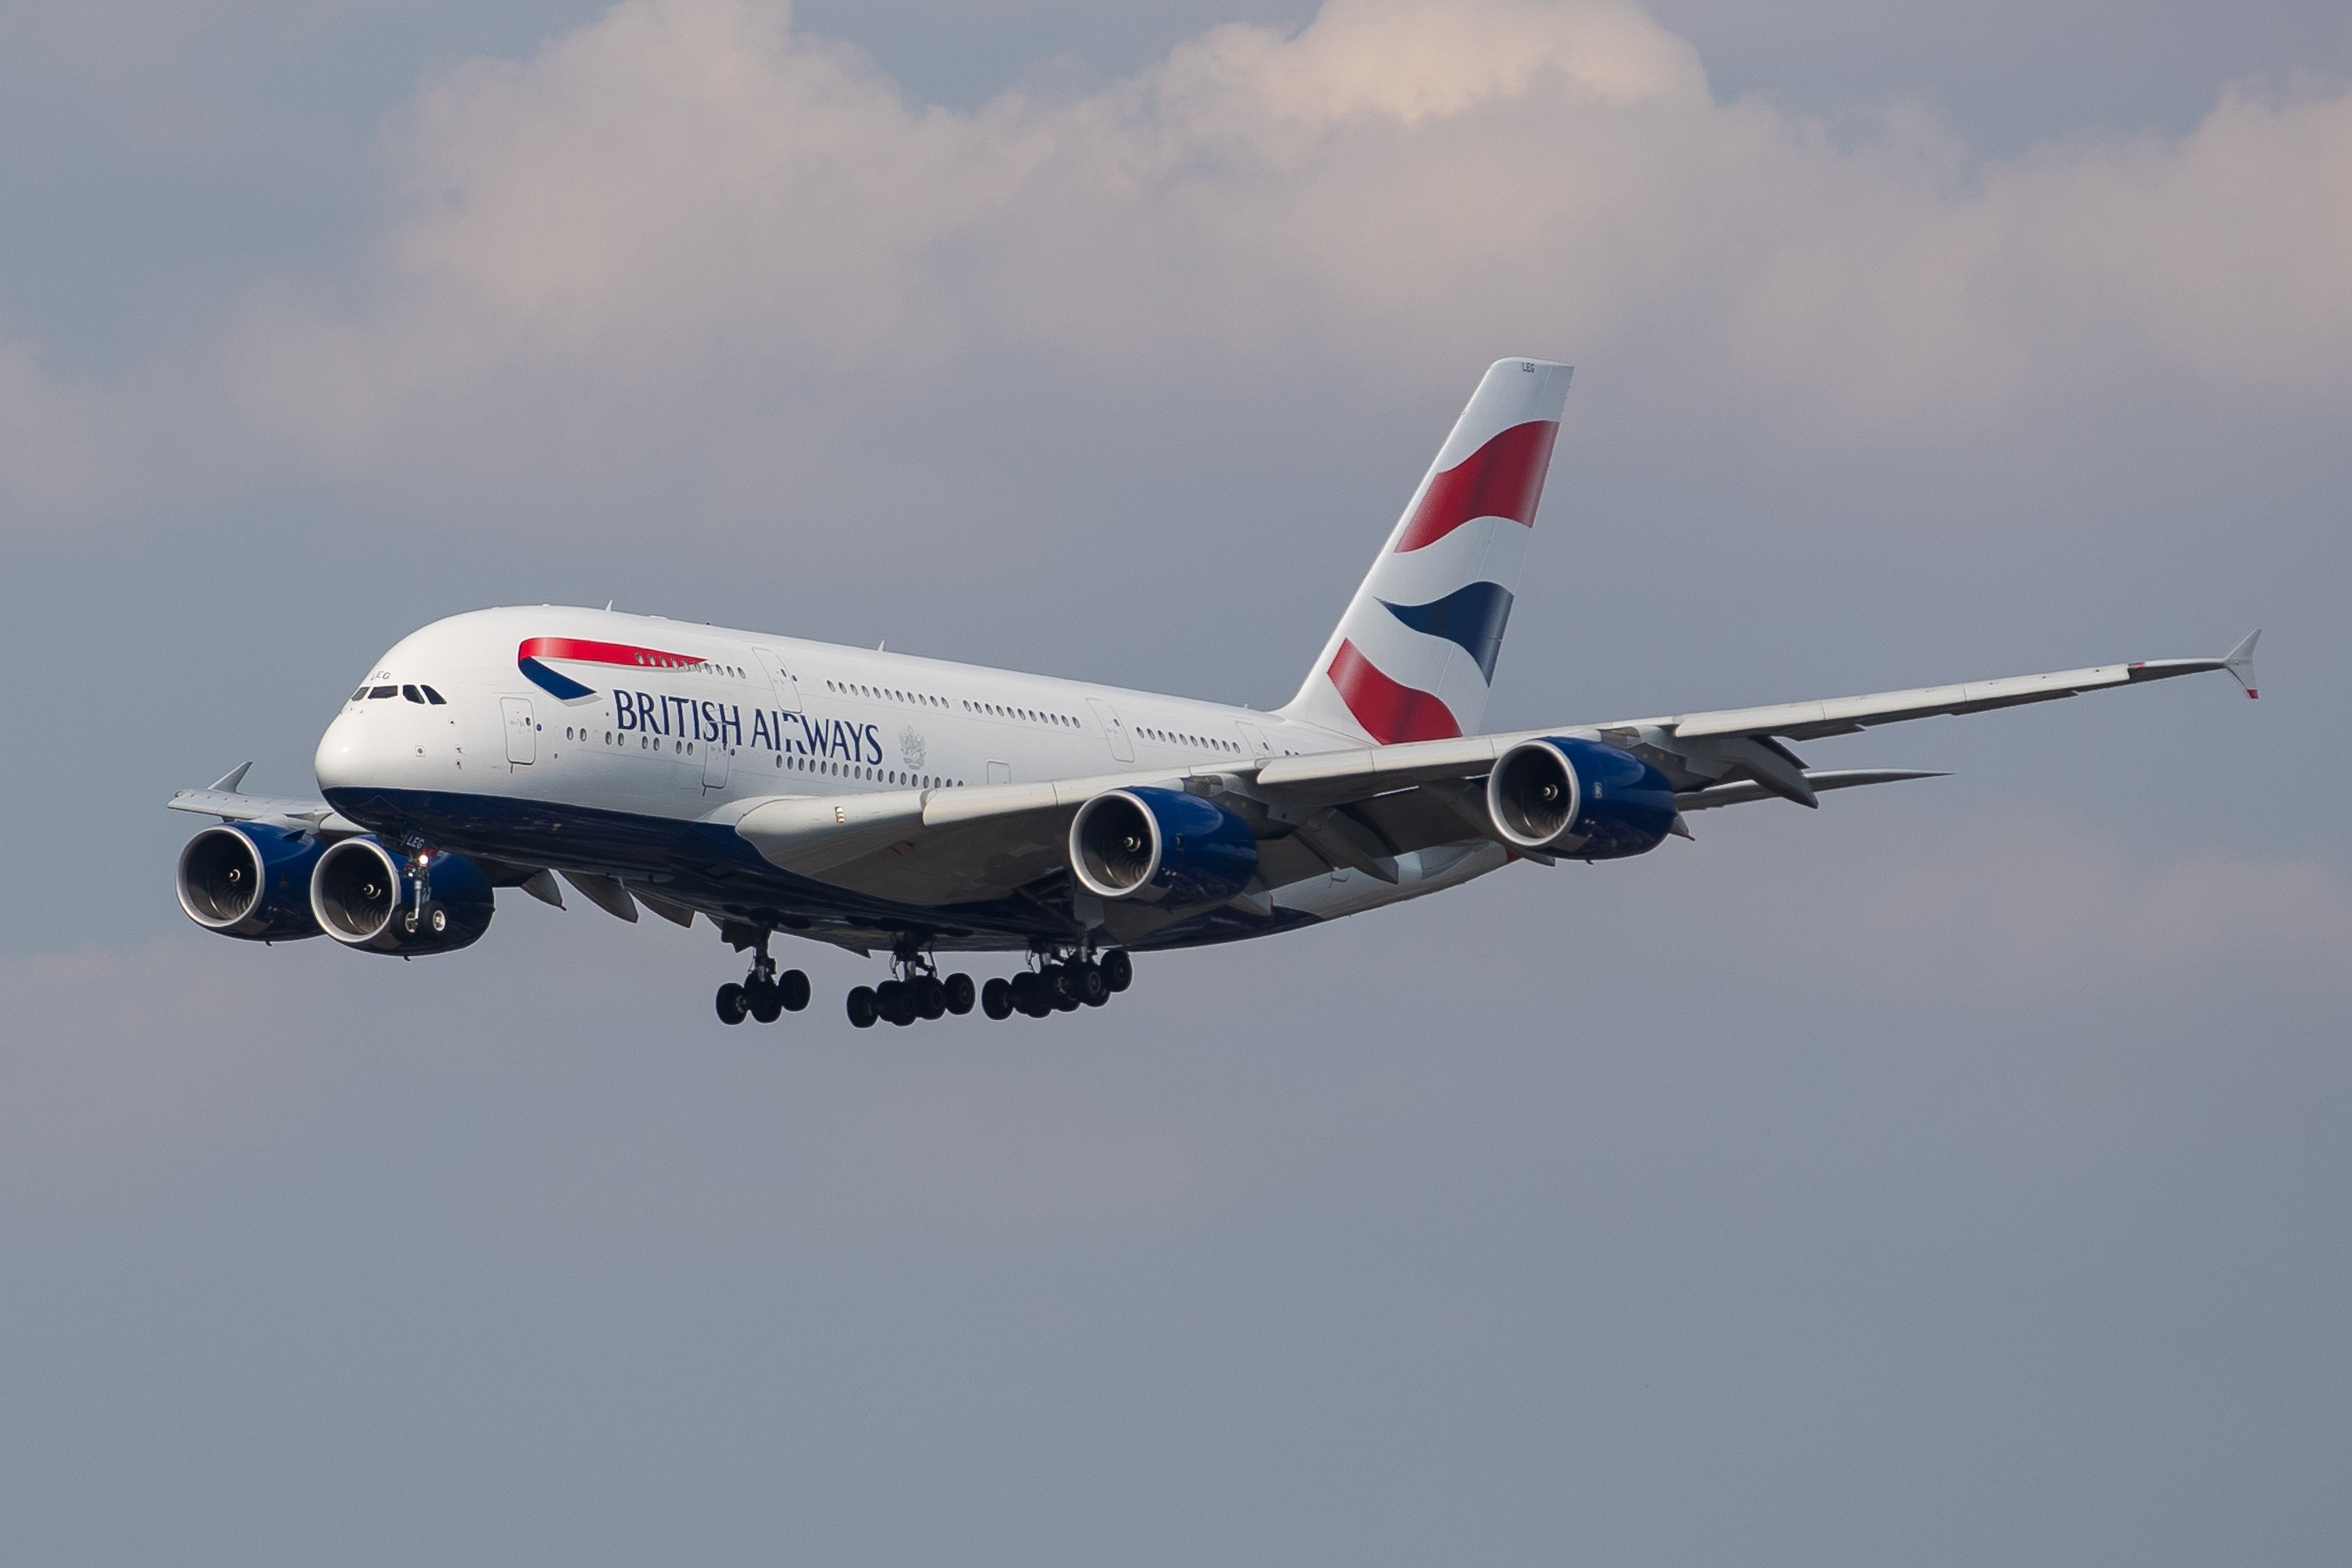 A British Airways A380 flying in the sky.